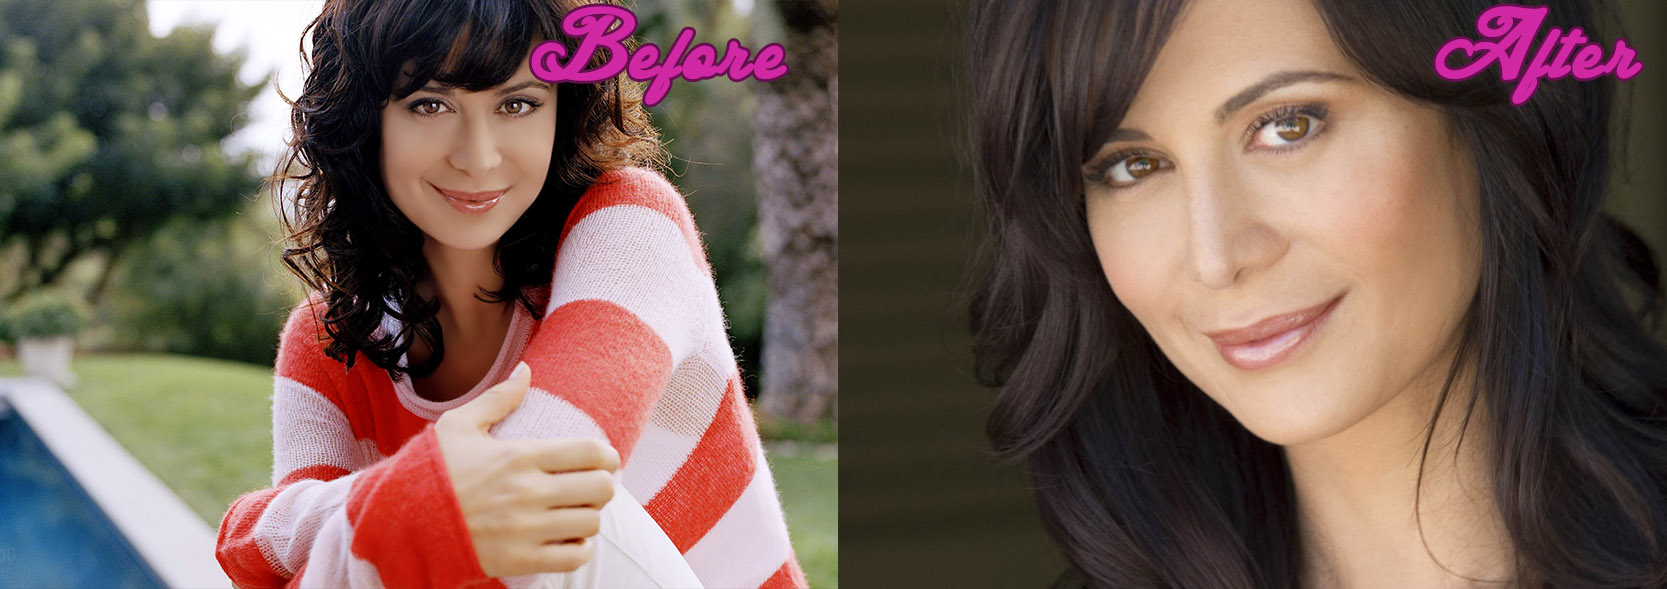 Catherine Bell Plastic Surgery: Before and After Nose Job Photos.